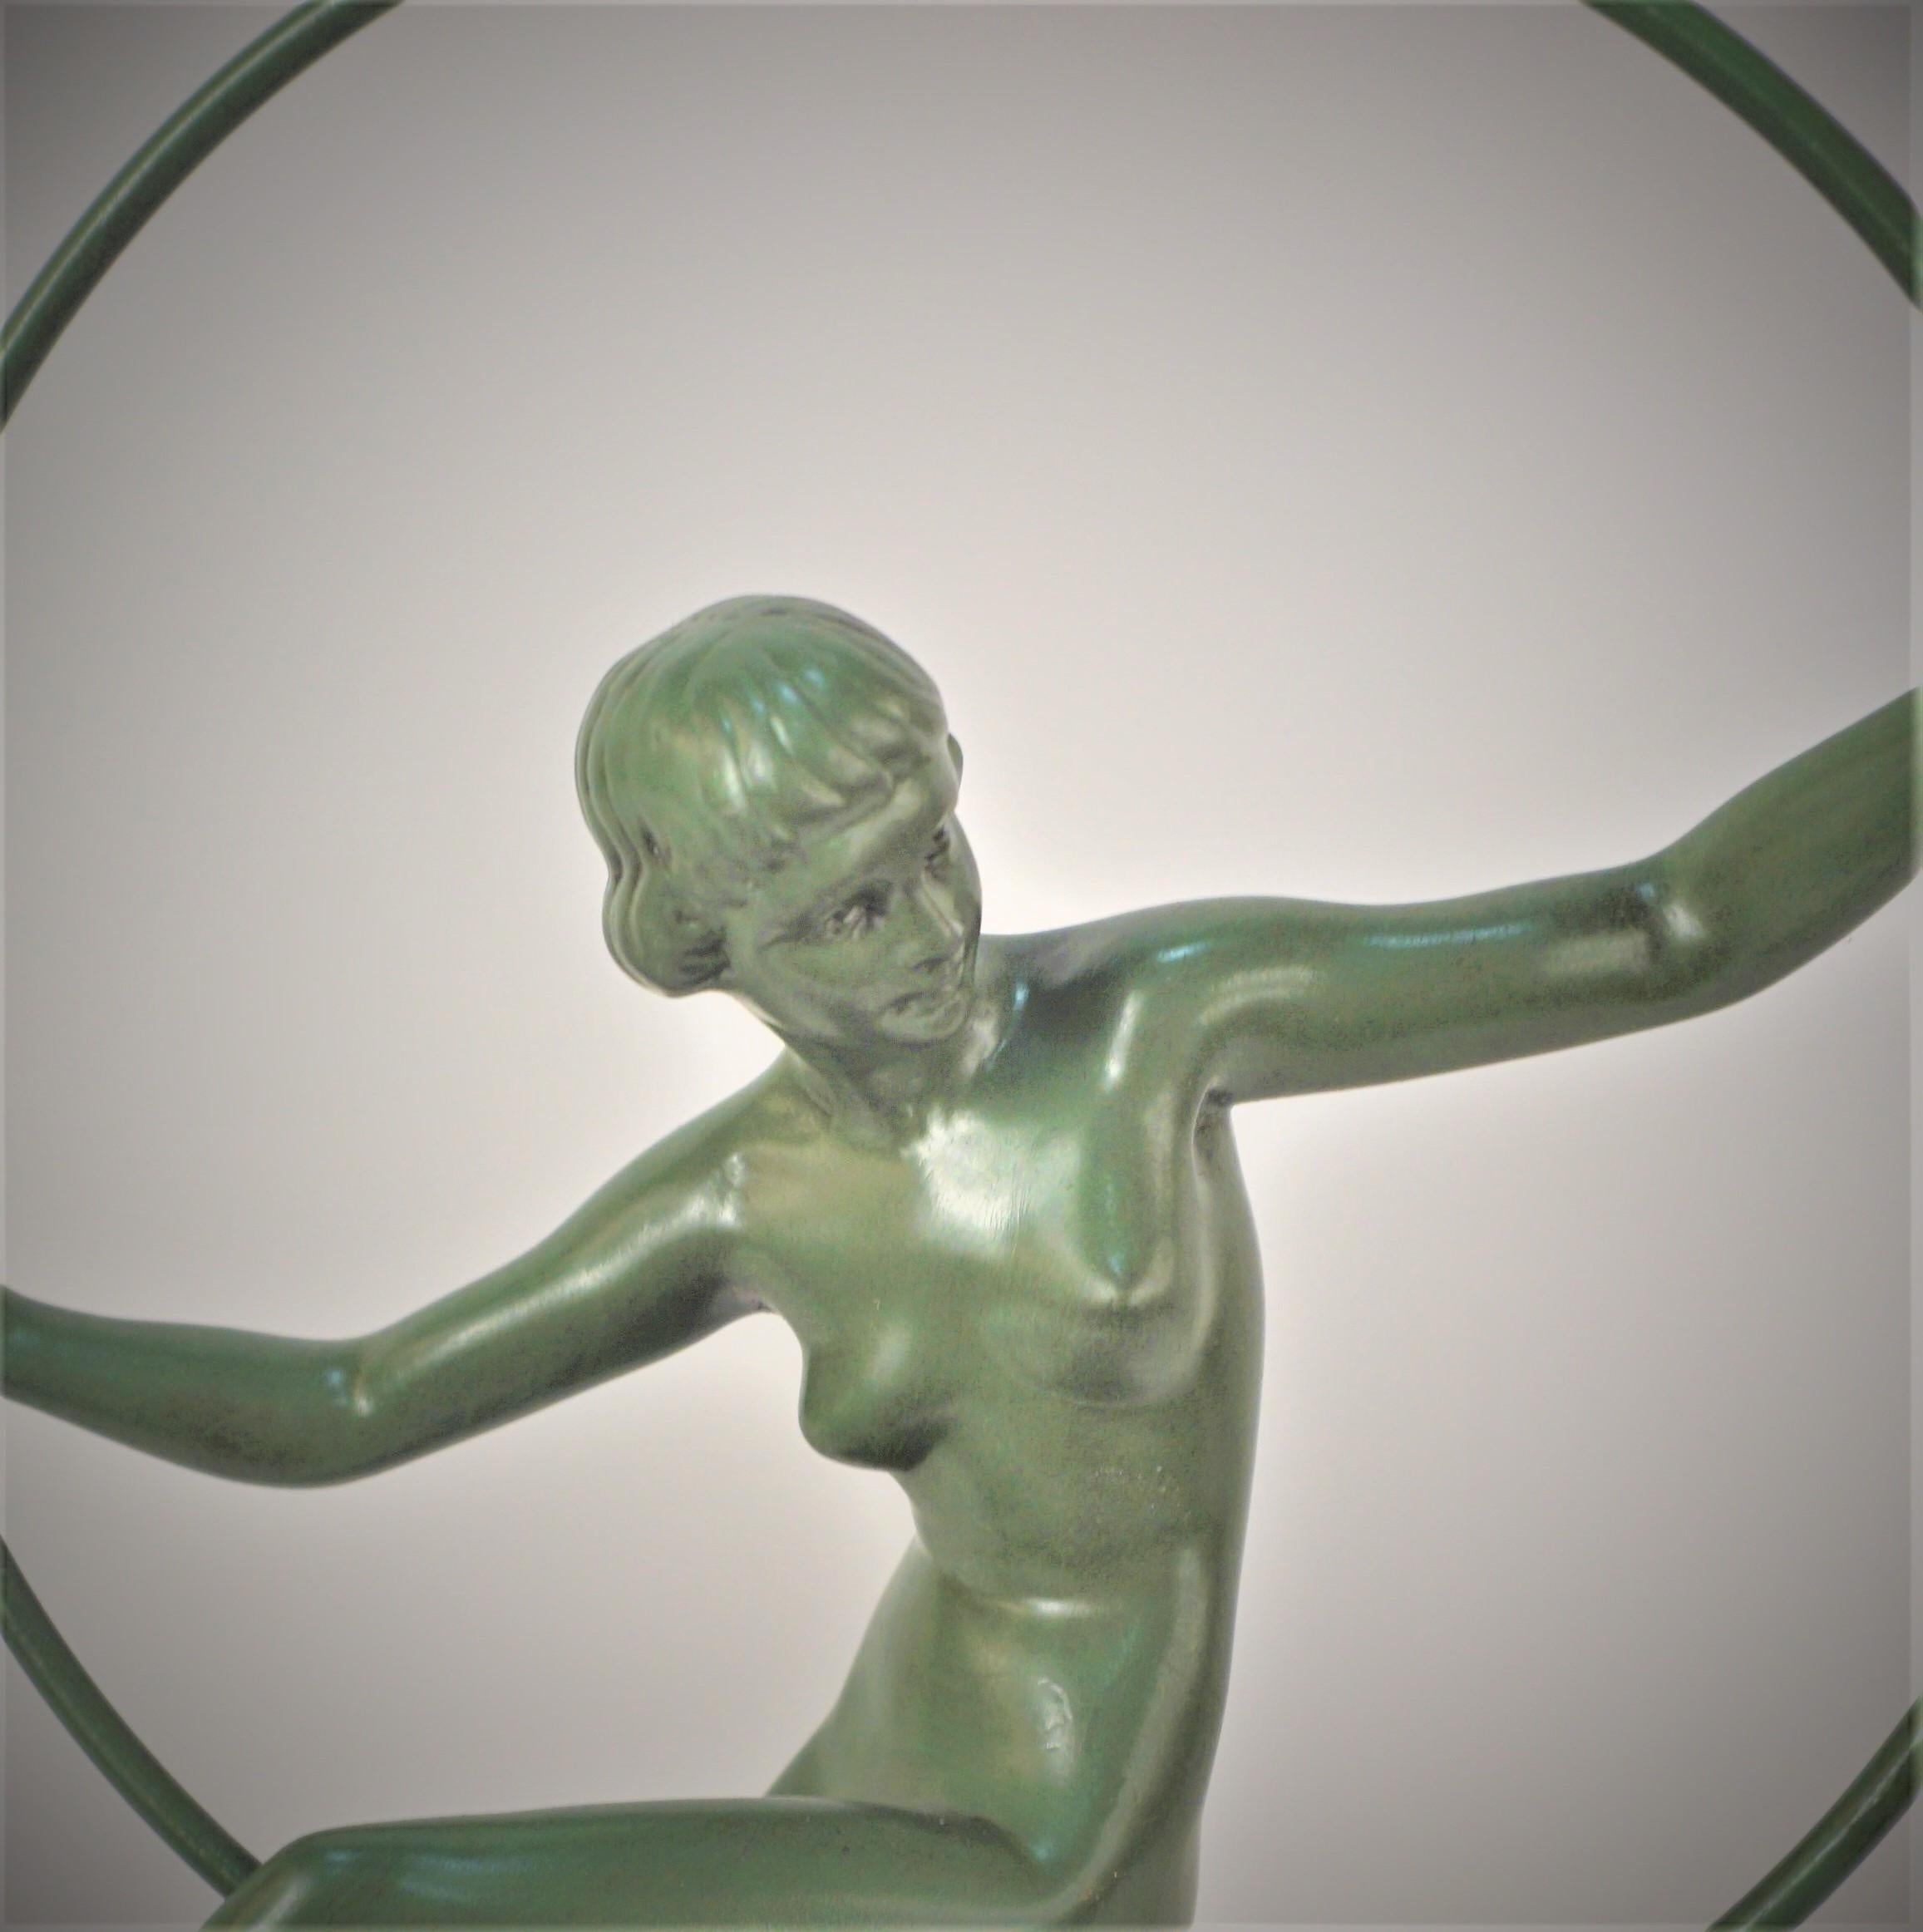 French 1930's Art Deco Sculpture Hoop Dancer Briand, Marcel Andre Bouraine For Sale 1